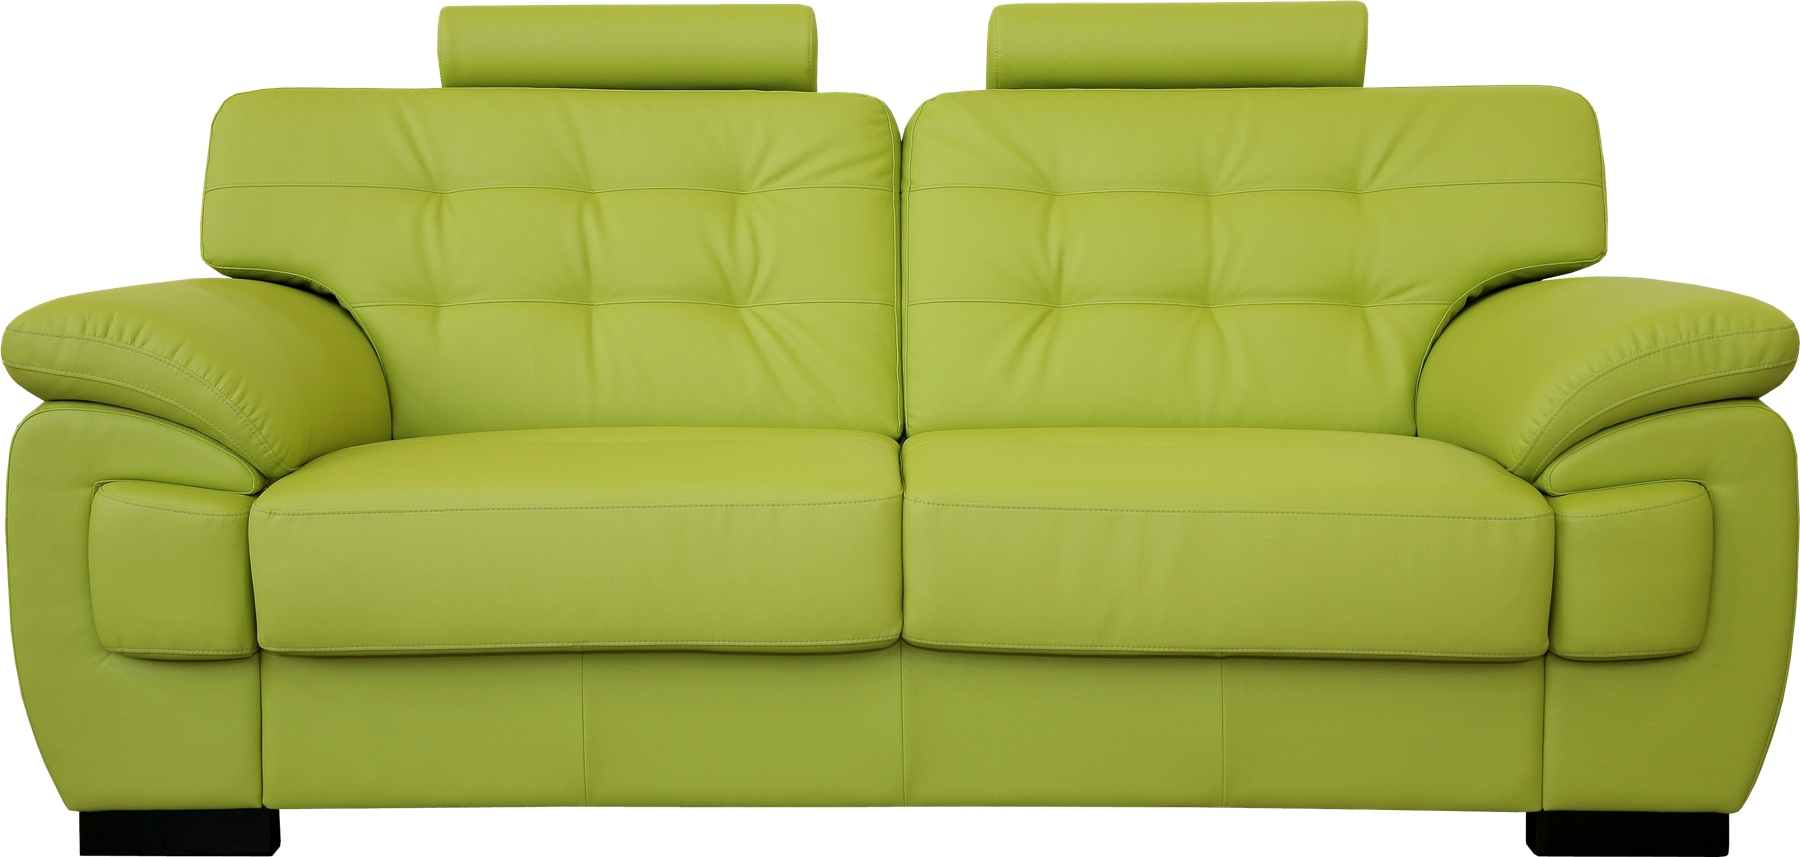 Sofa Bed Background PNG